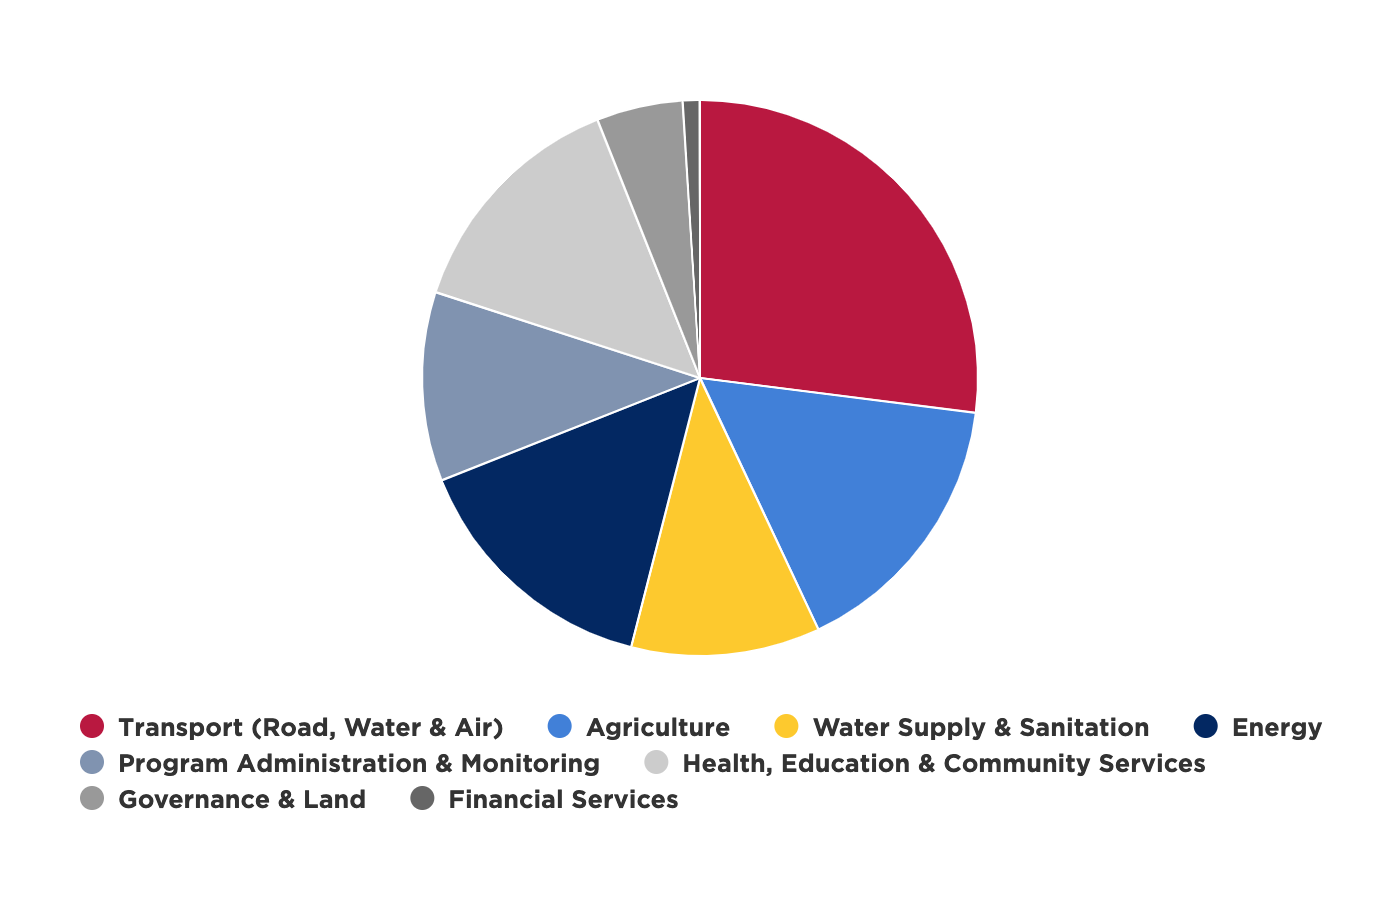 Graphic pie chart illustrating MCC investments by sector as percentages of total investments.